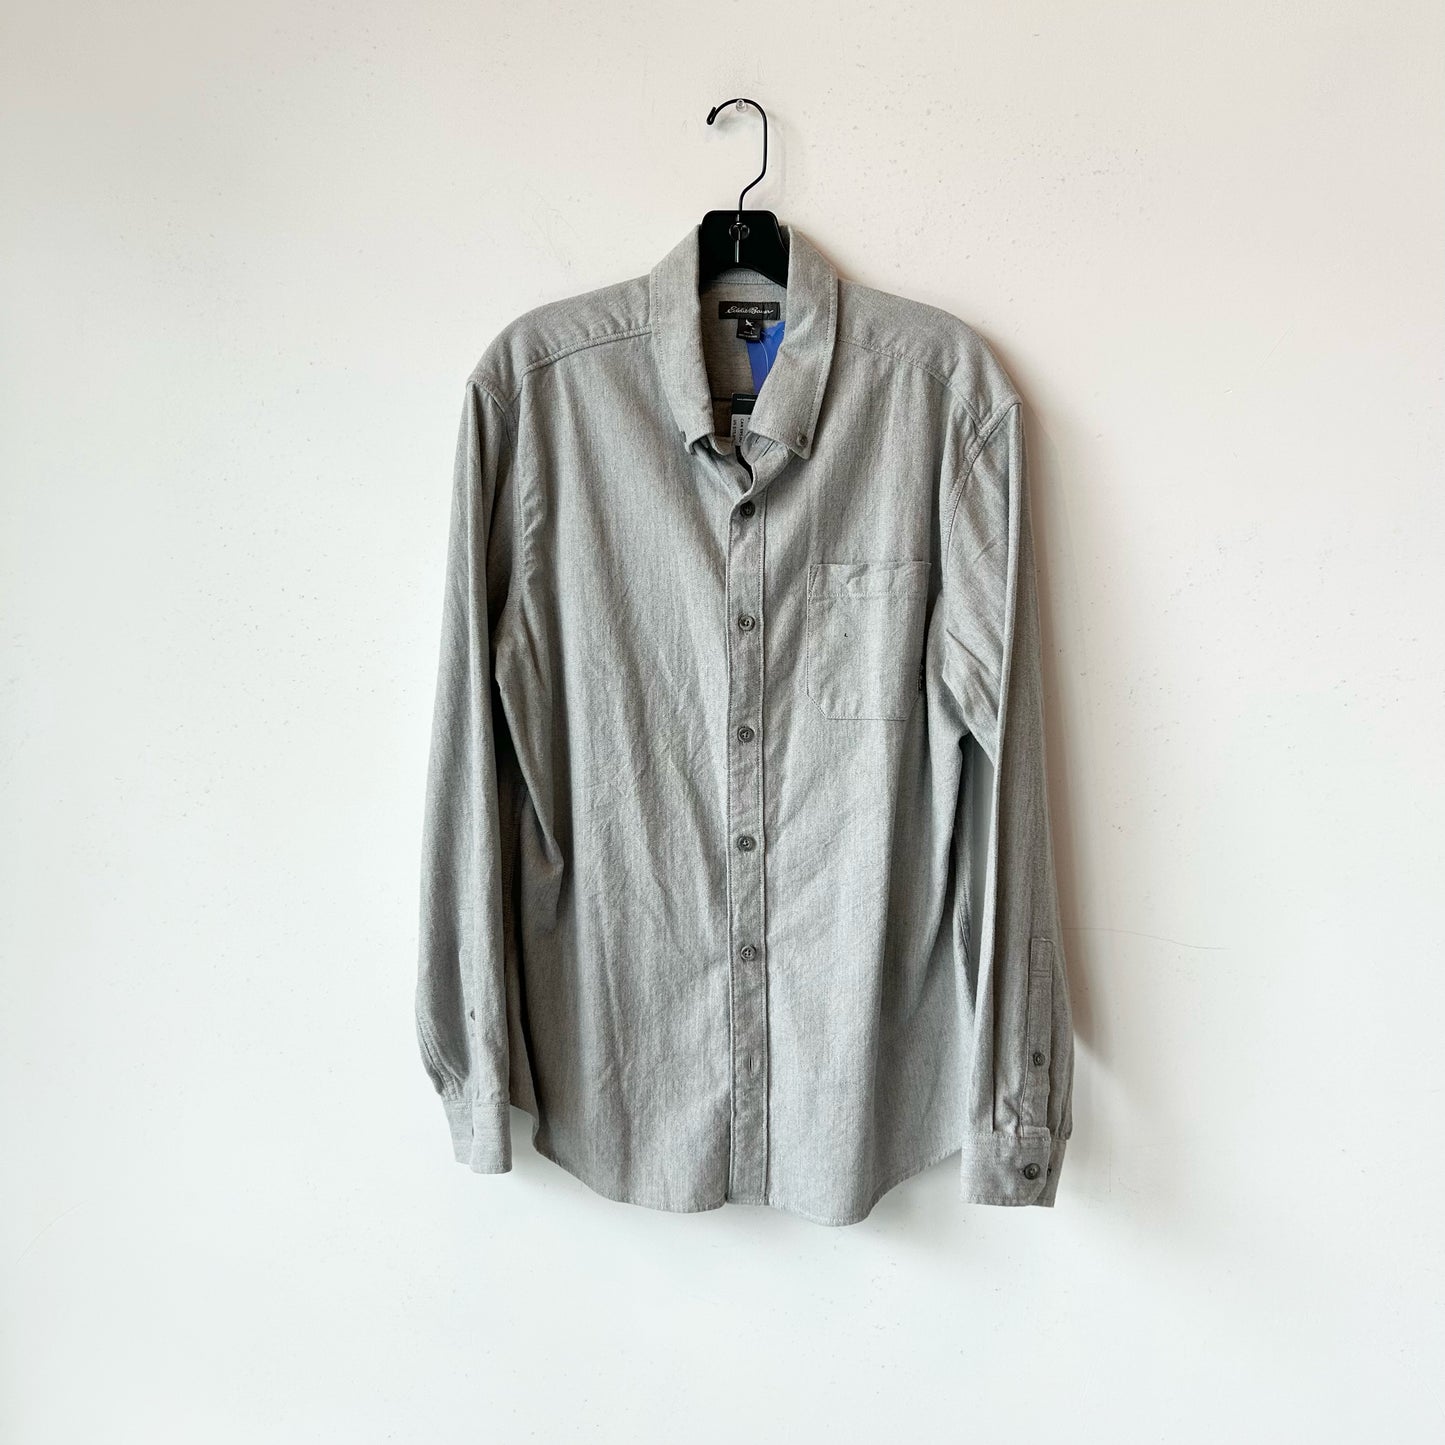 L Eddie Bauer Gray Button Up Long Sleeve